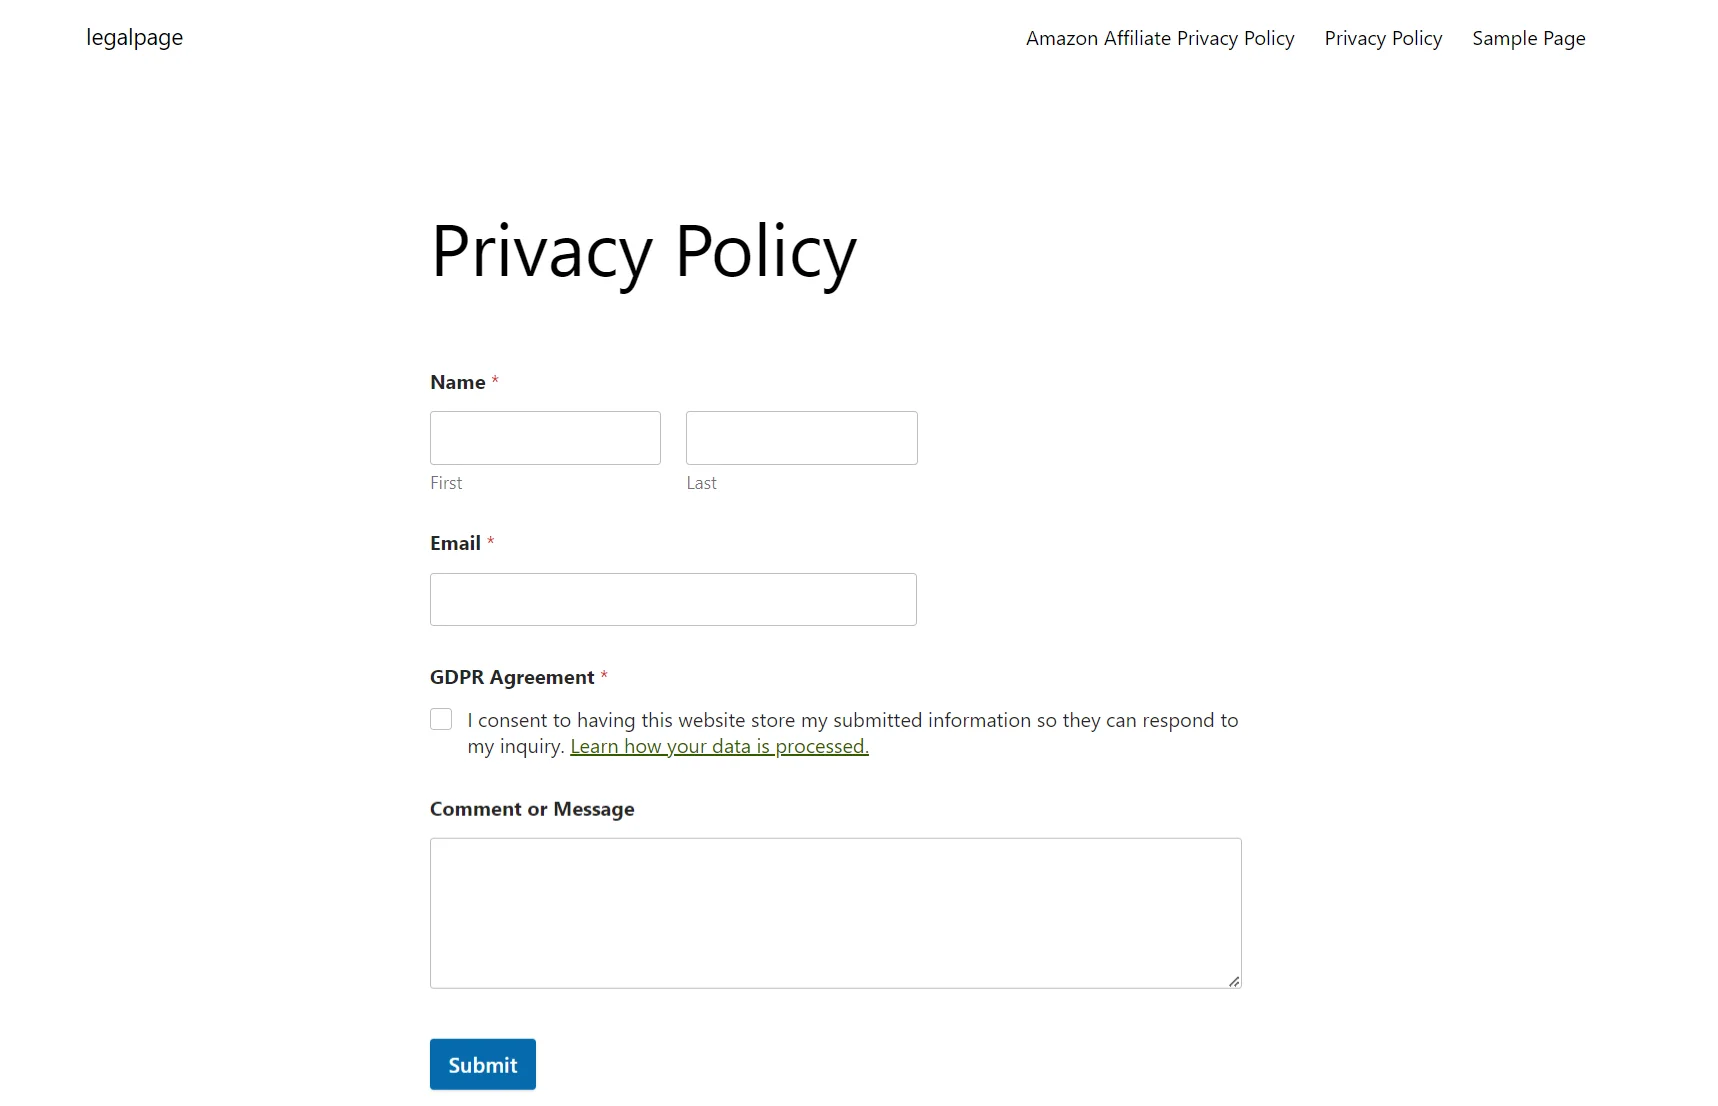 Previewing the live page on the website for GDPR check box